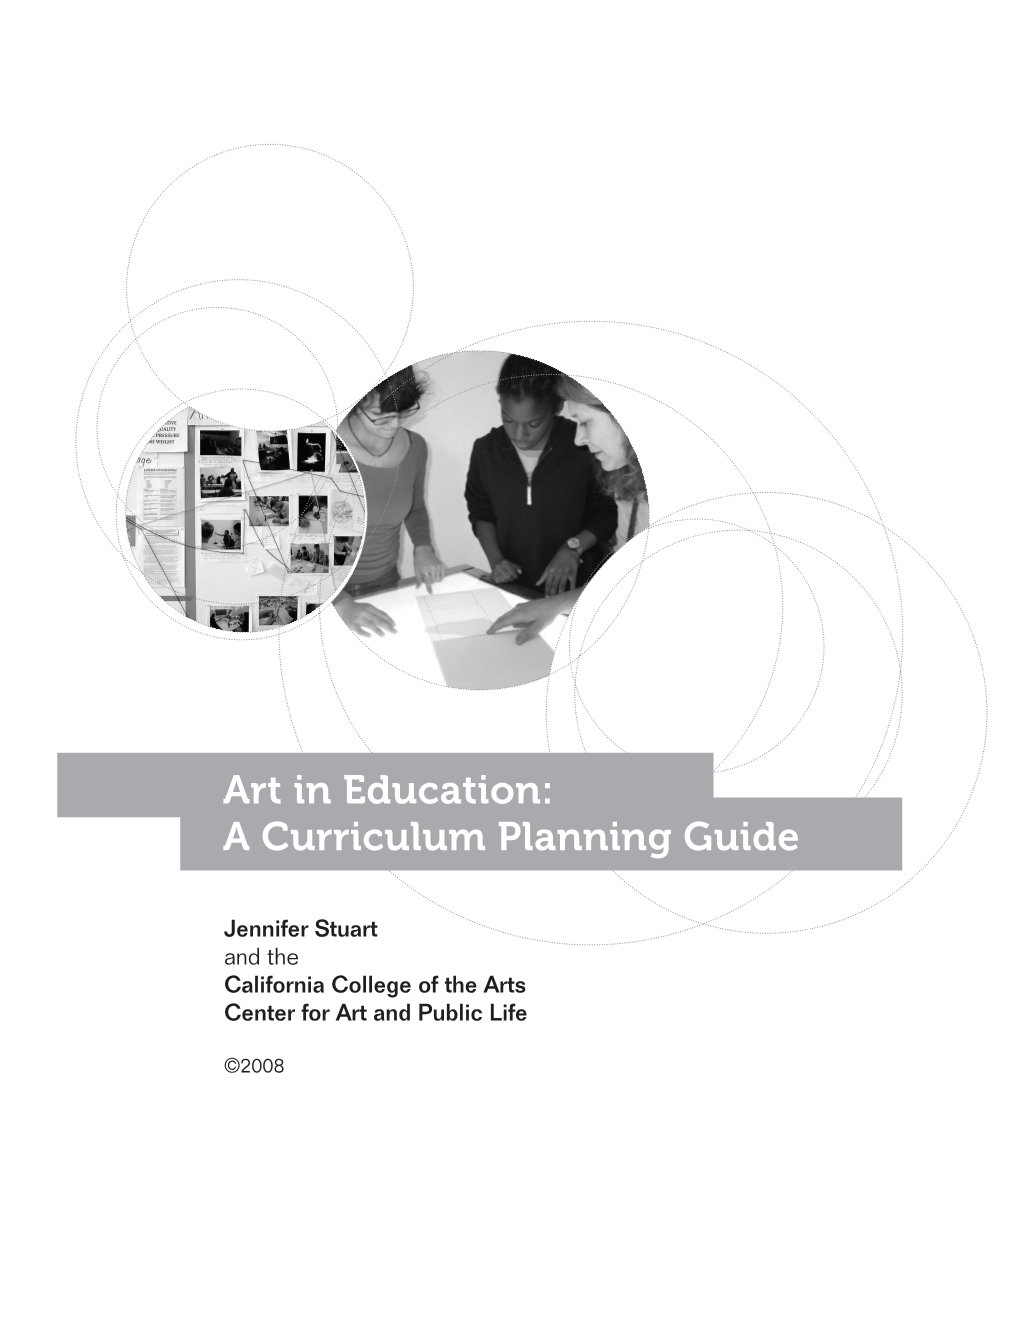 Art in Education: a Curriculum Planning Guide